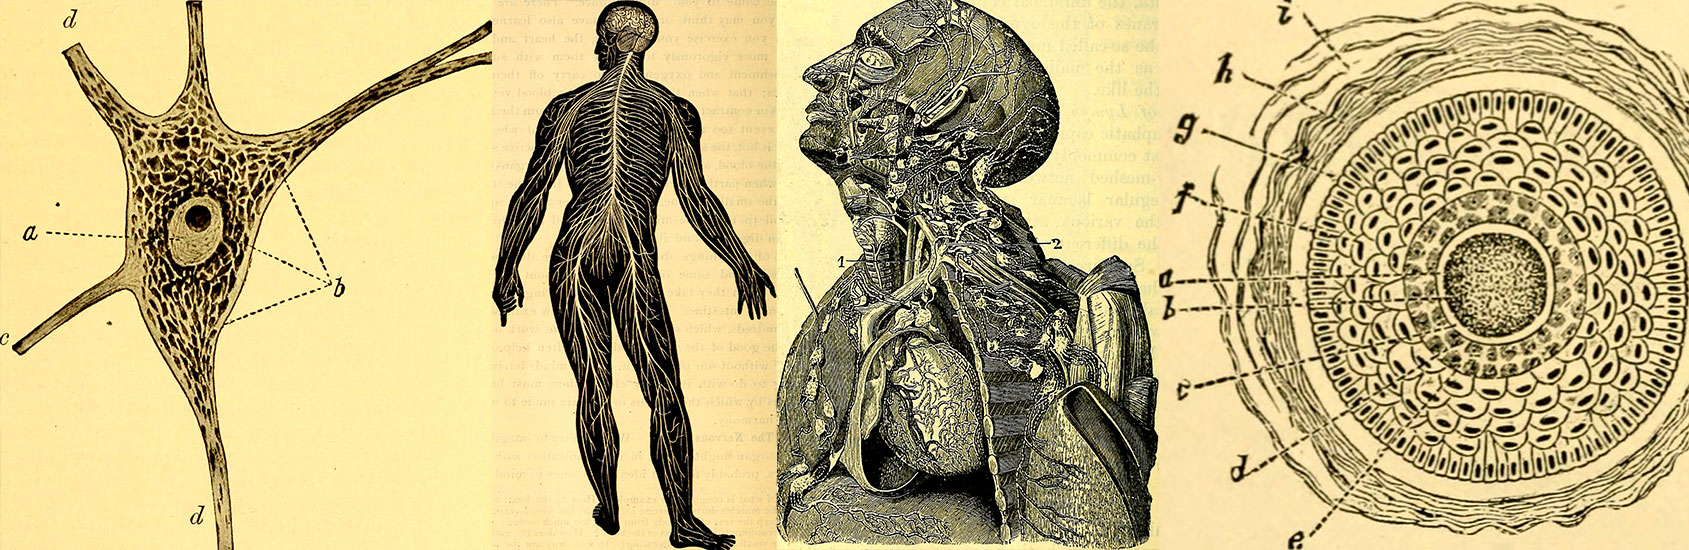 The constant reshaping of the human body Wiki commons images collage by Marie Reig Florensa 